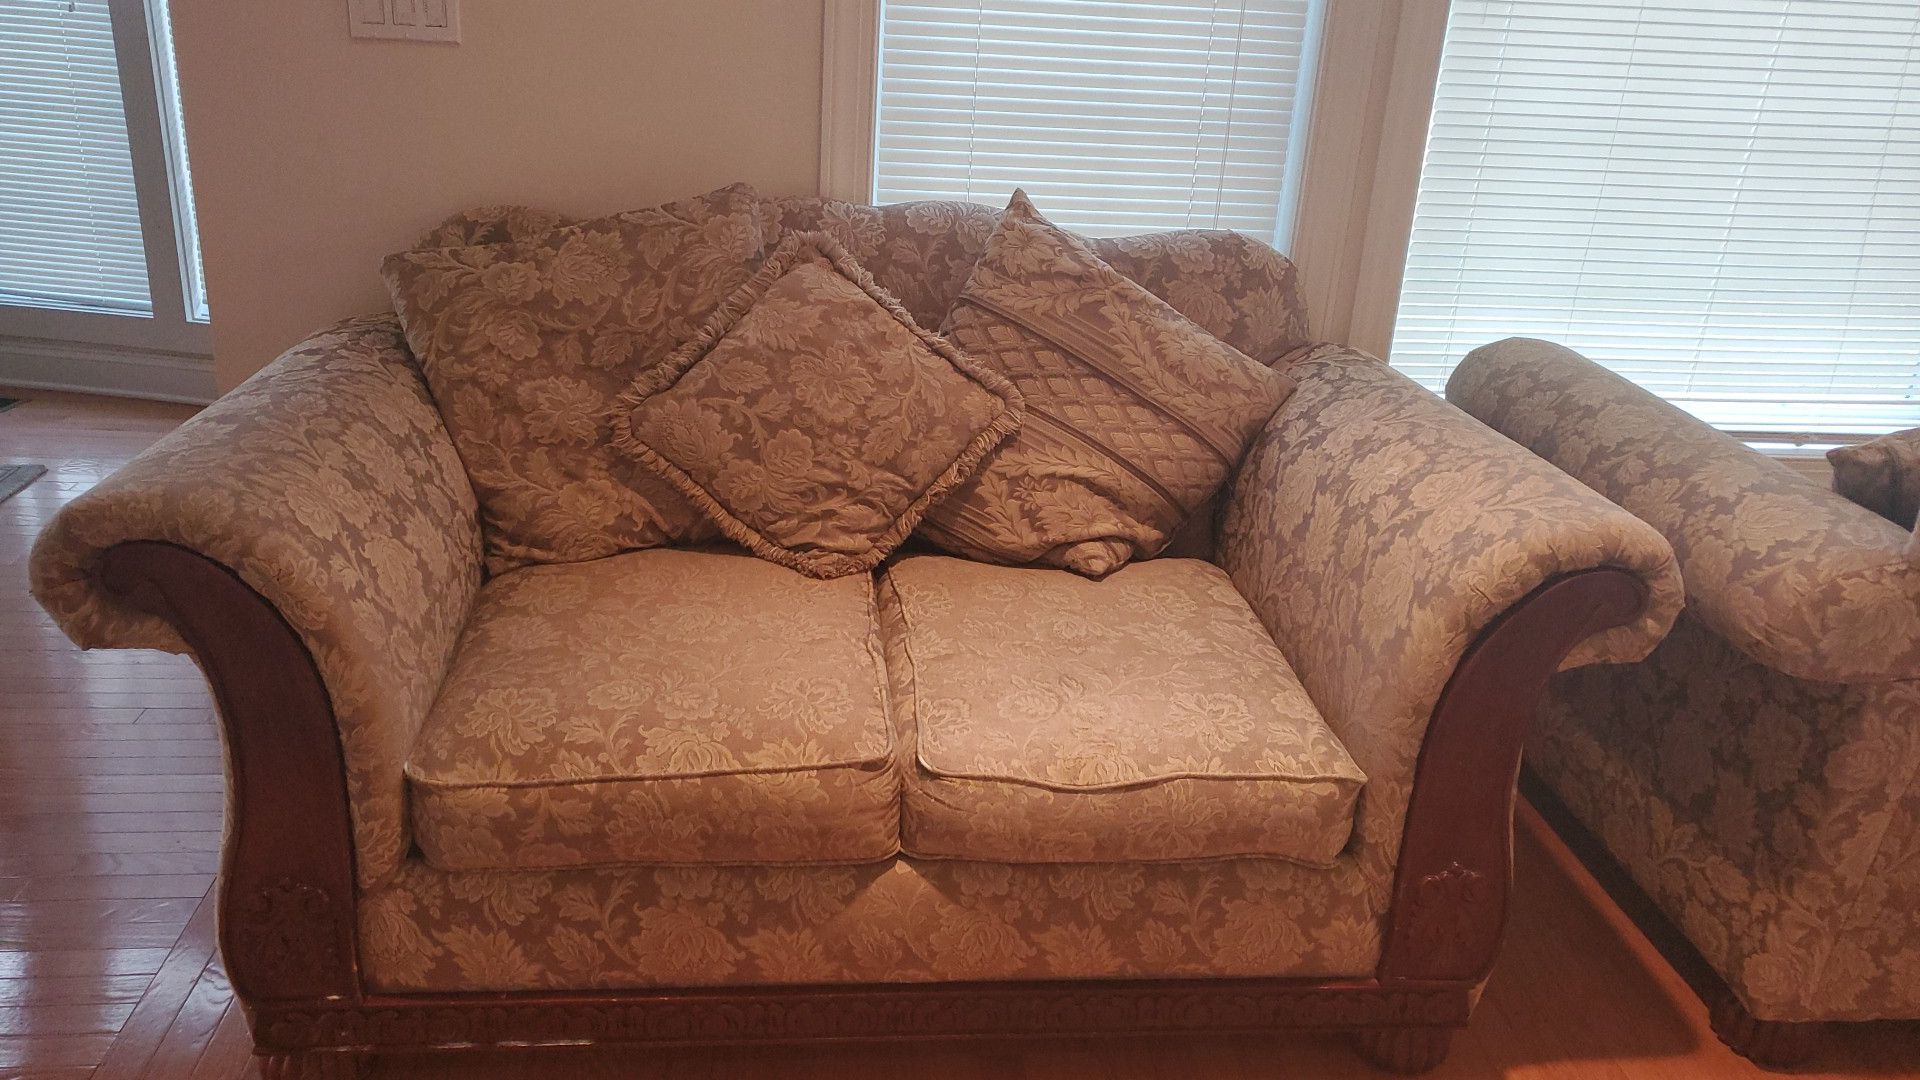 Selling this sofa its 2 piece